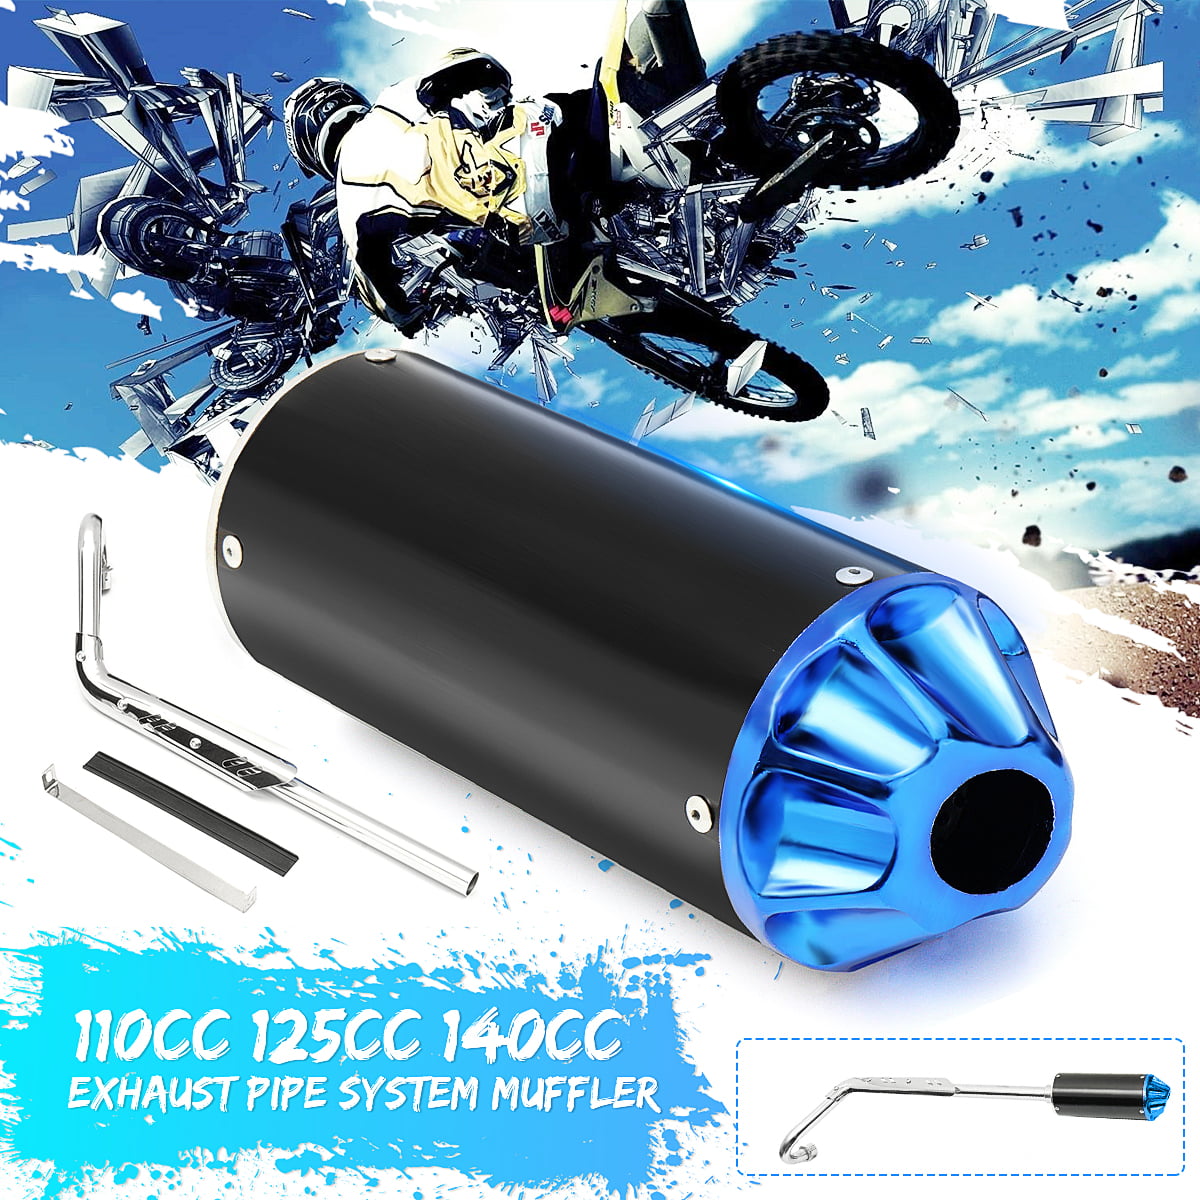 1Set DLE 111cc Long Exhaust Pipe Single with Accessories 